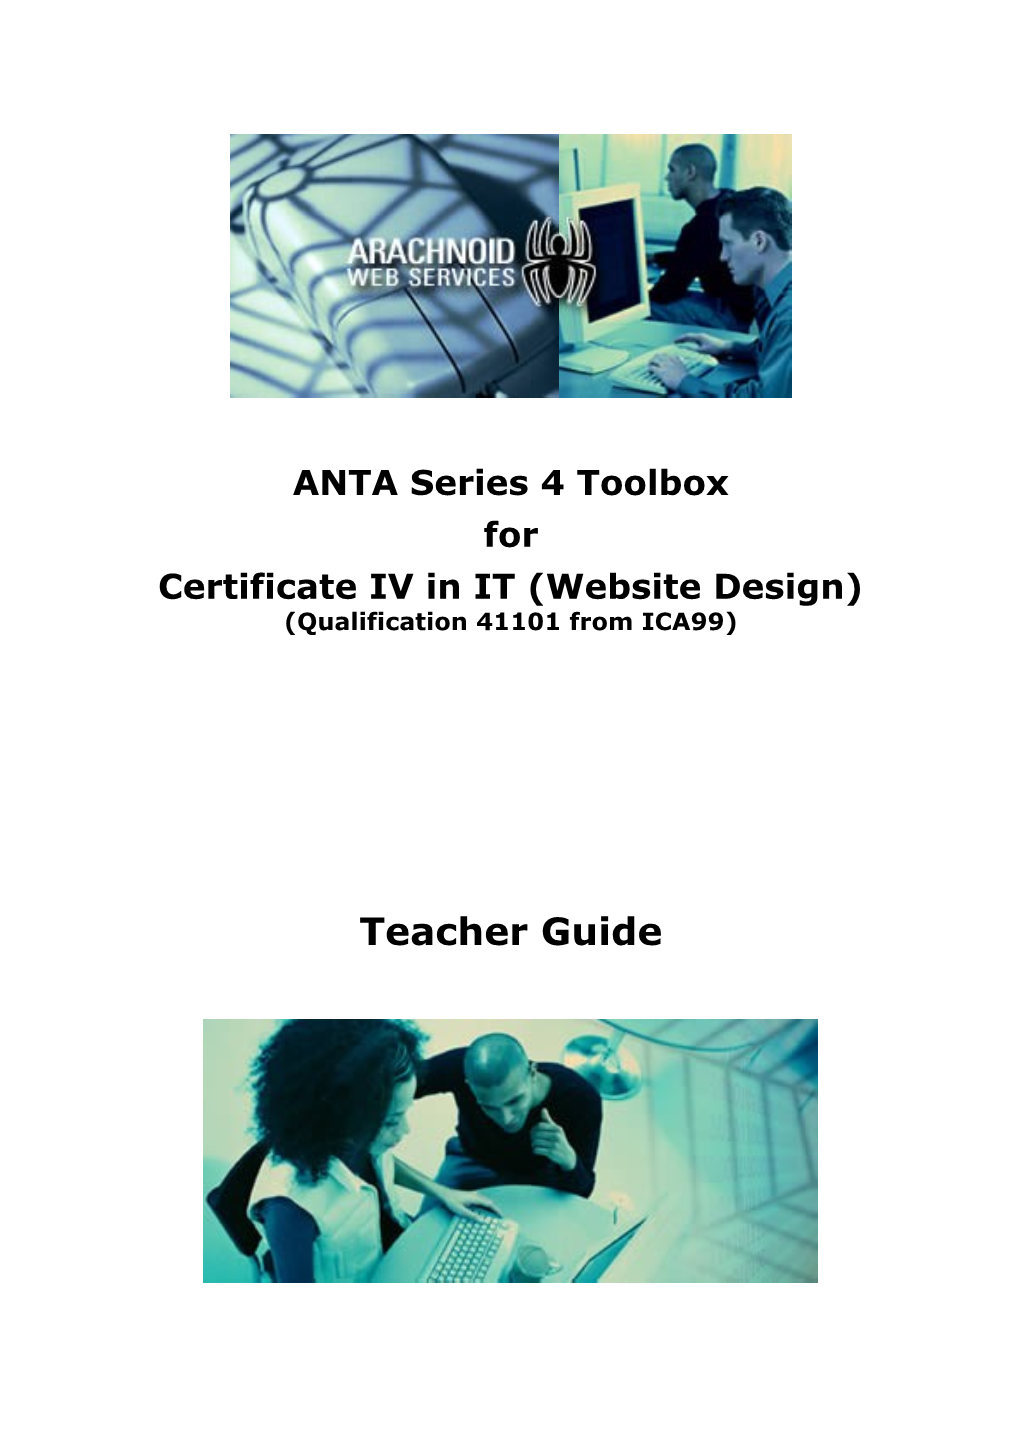 The ANTA Toolbox for Certificate IV in IT (Website Design)